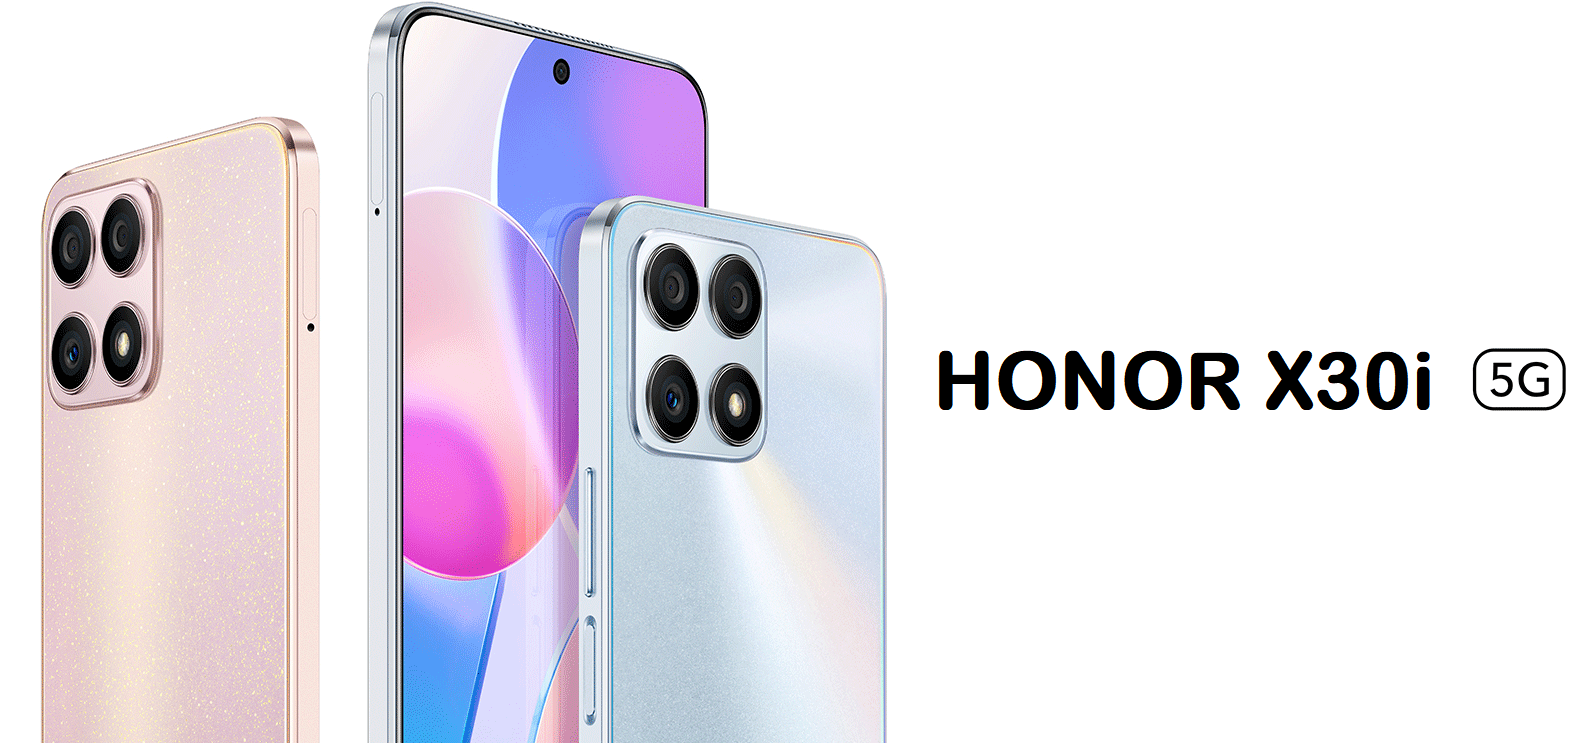 Honor X30i - Dimensity 810, 48MP camera, Android 11 and Magic UI 5.0 for $220